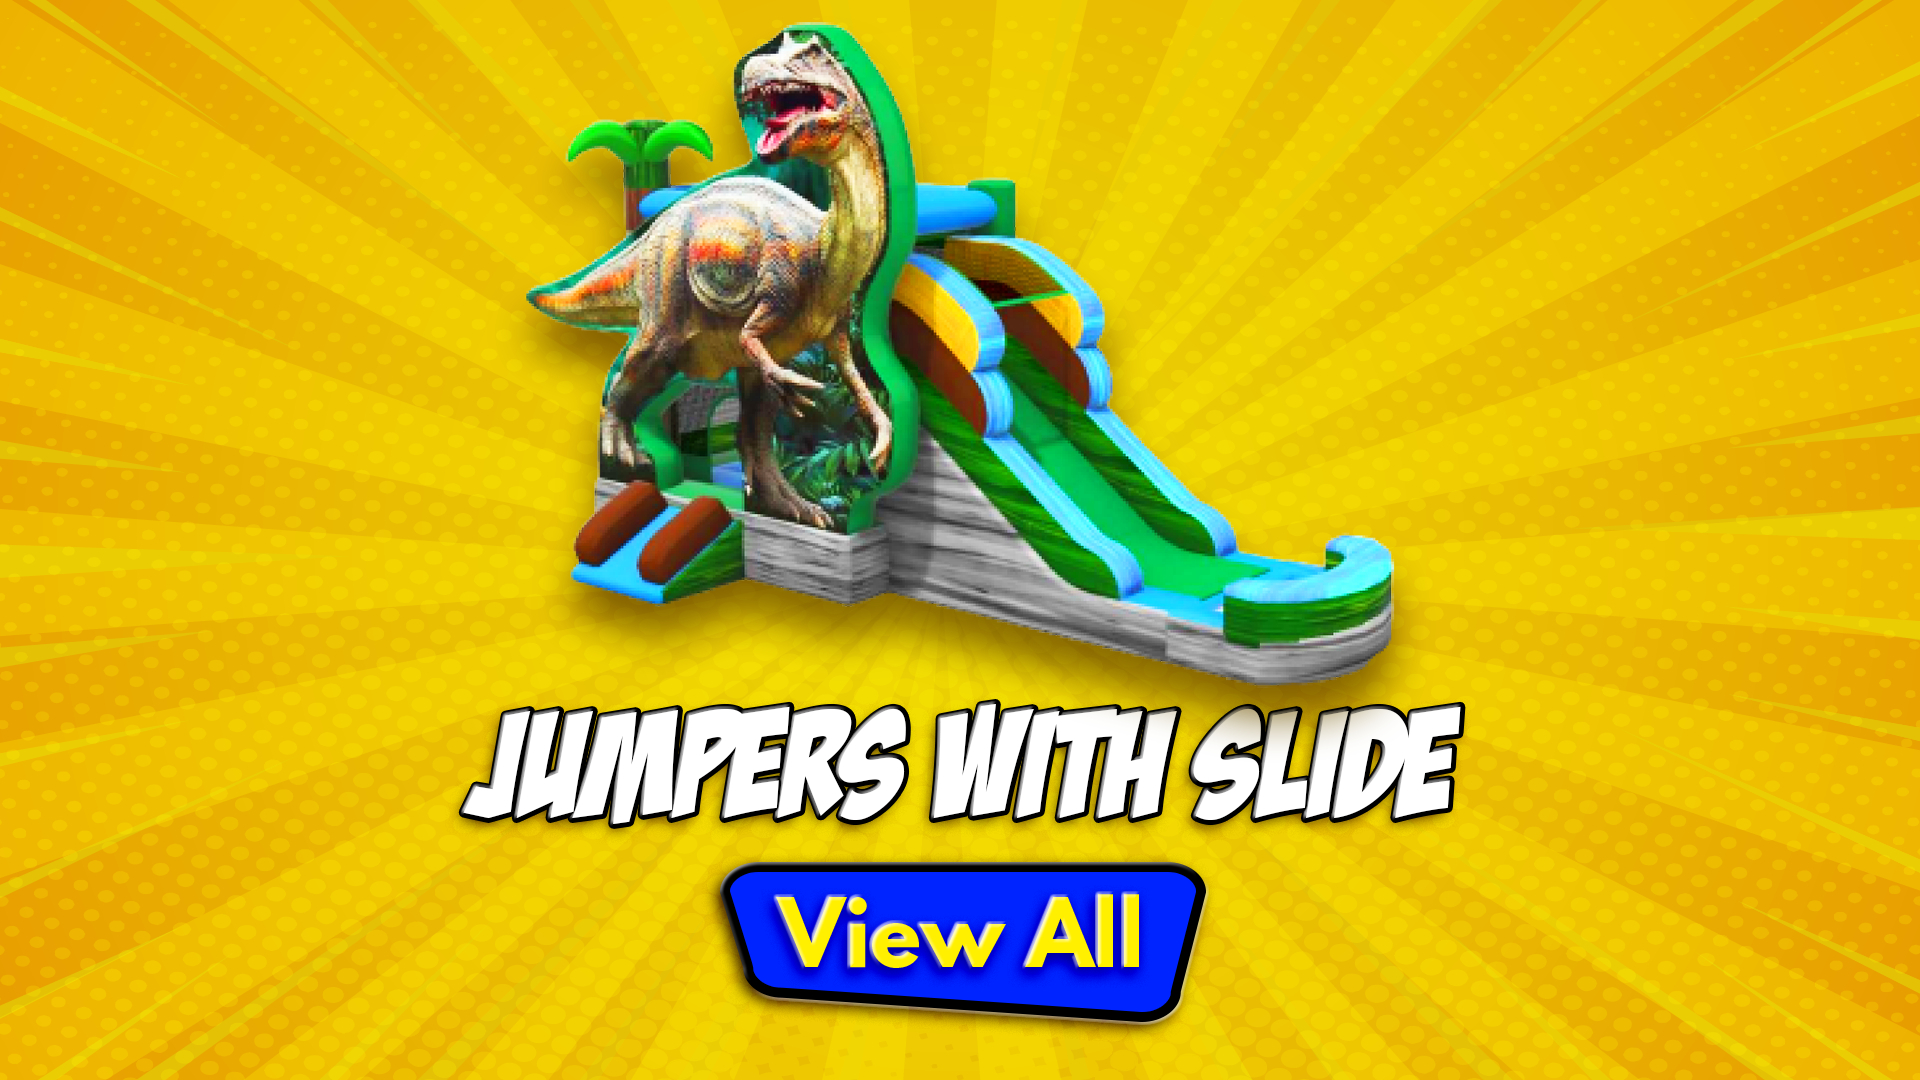 Jumper with Slide Rentals in Mountain View